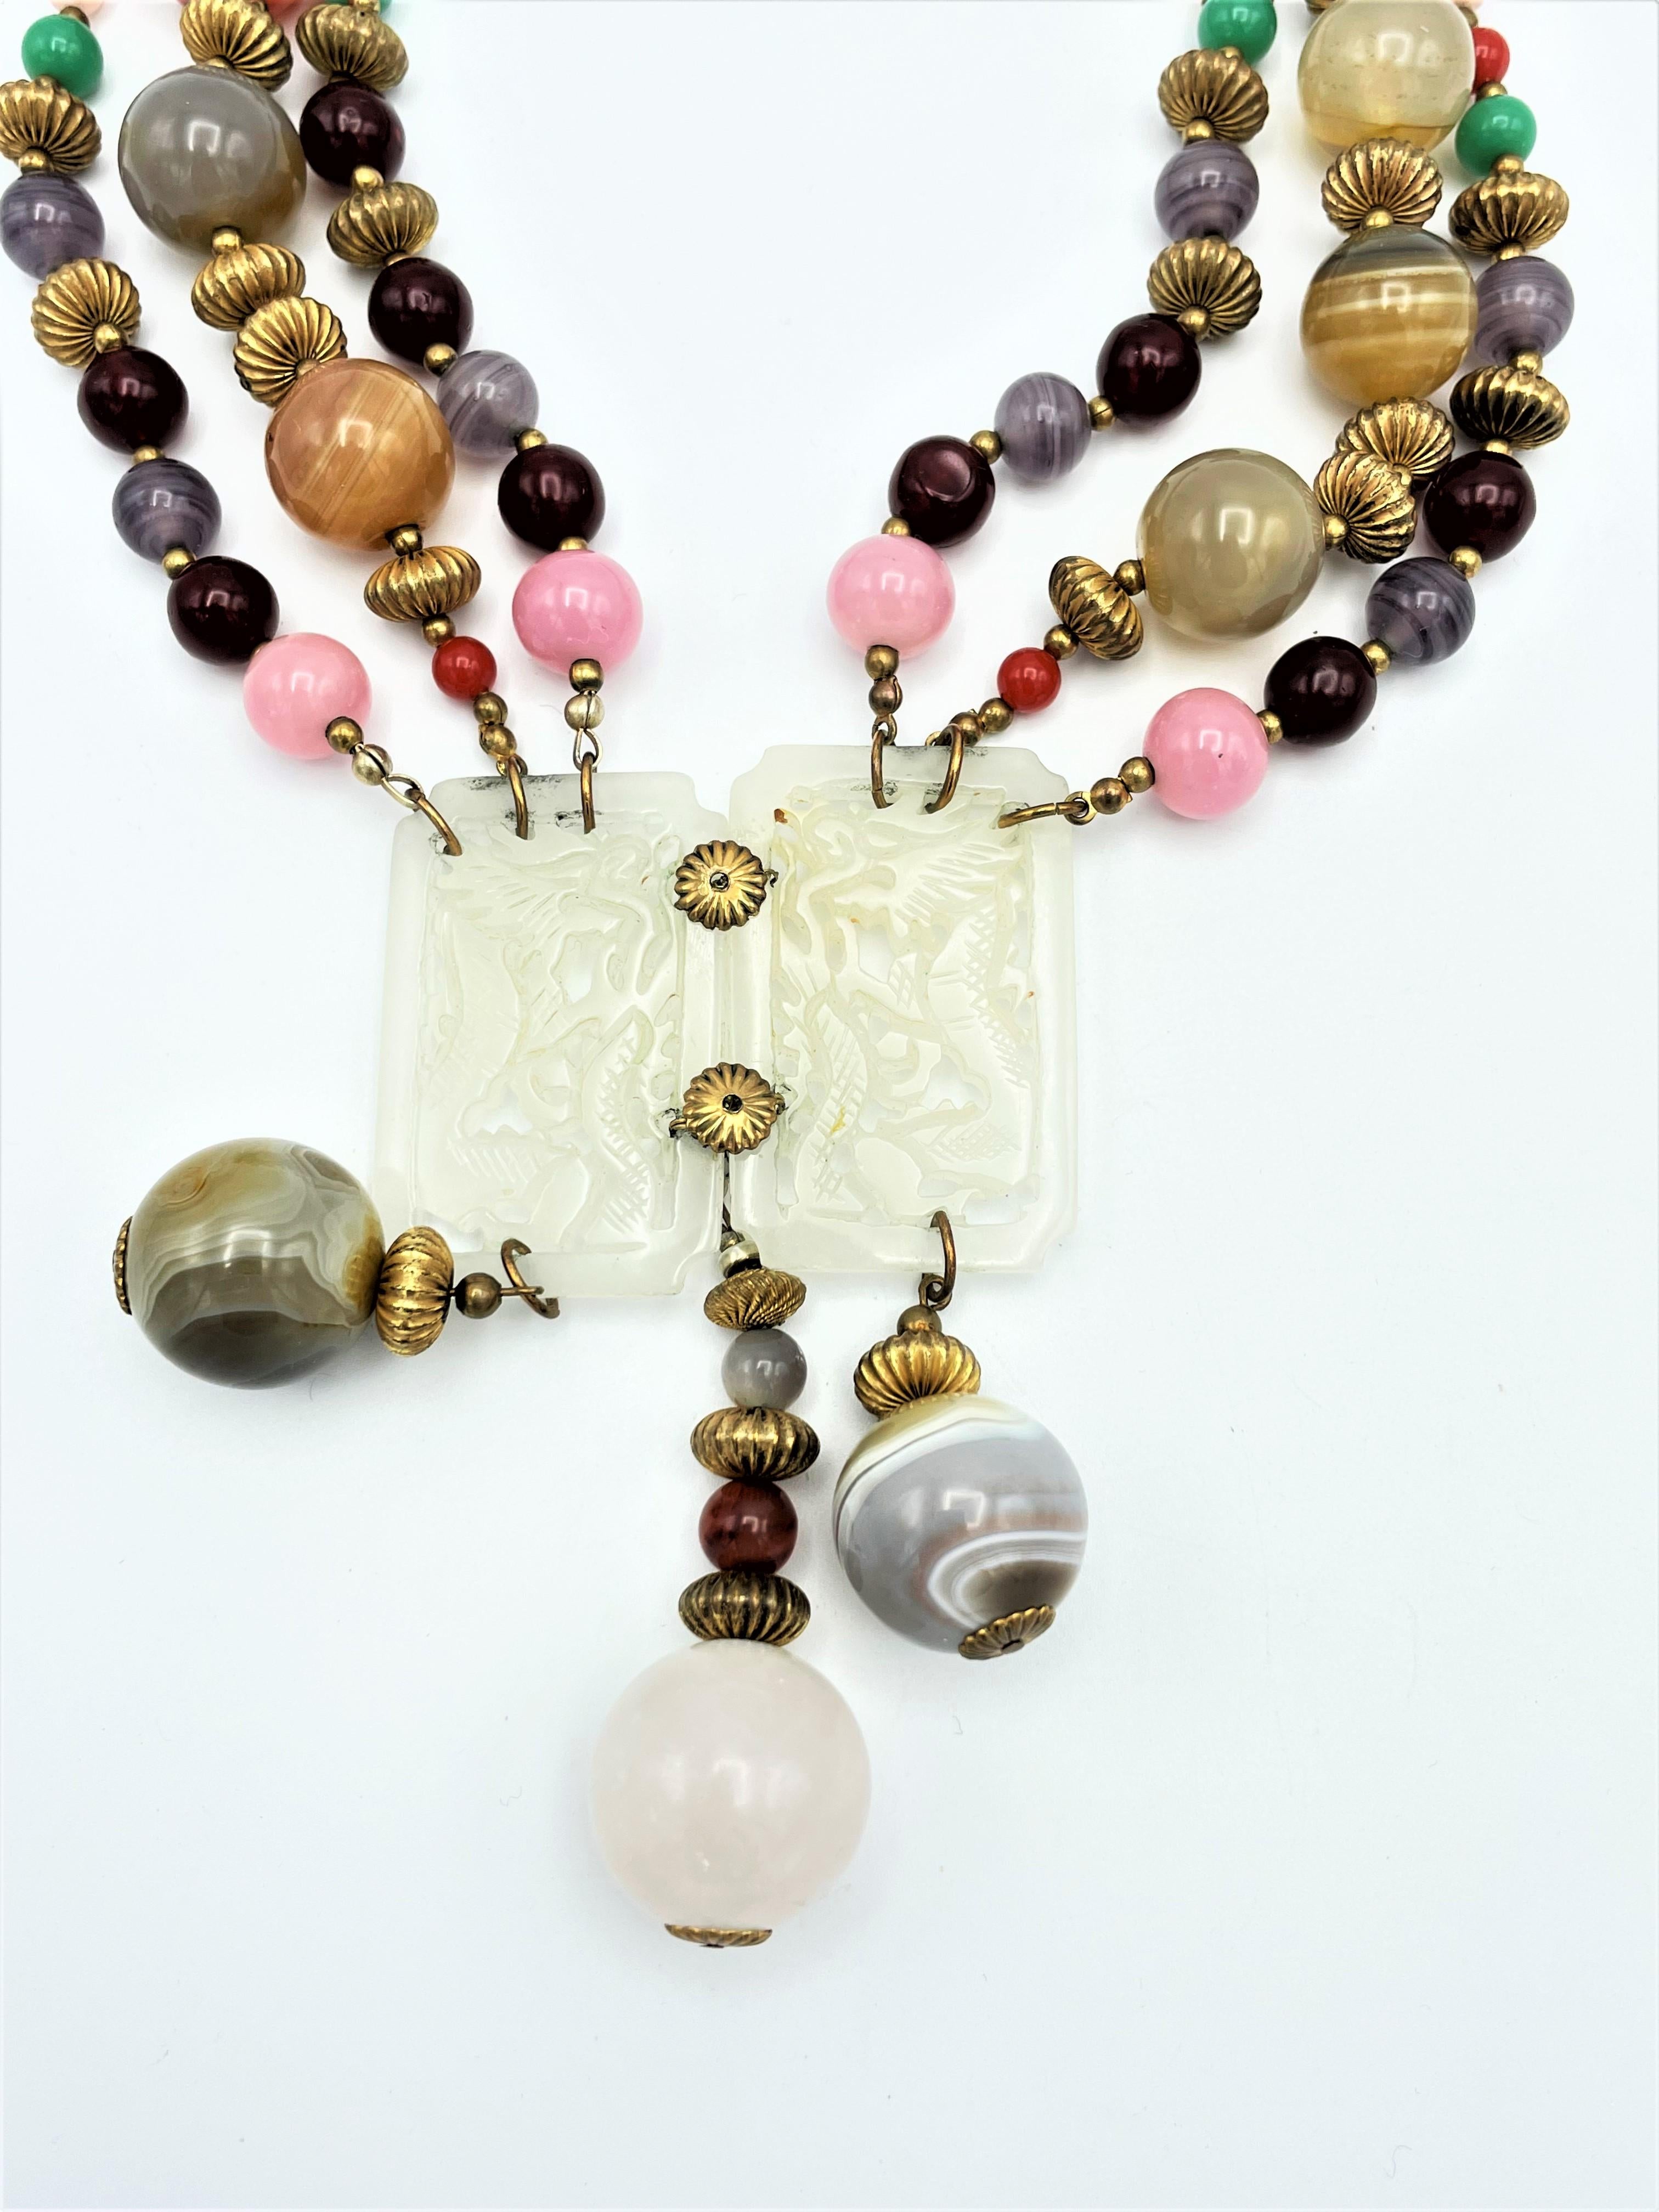 Artisan Vintage Miriam Haskell necklace, agate and glass beads, jade similar  1950s USA For Sale